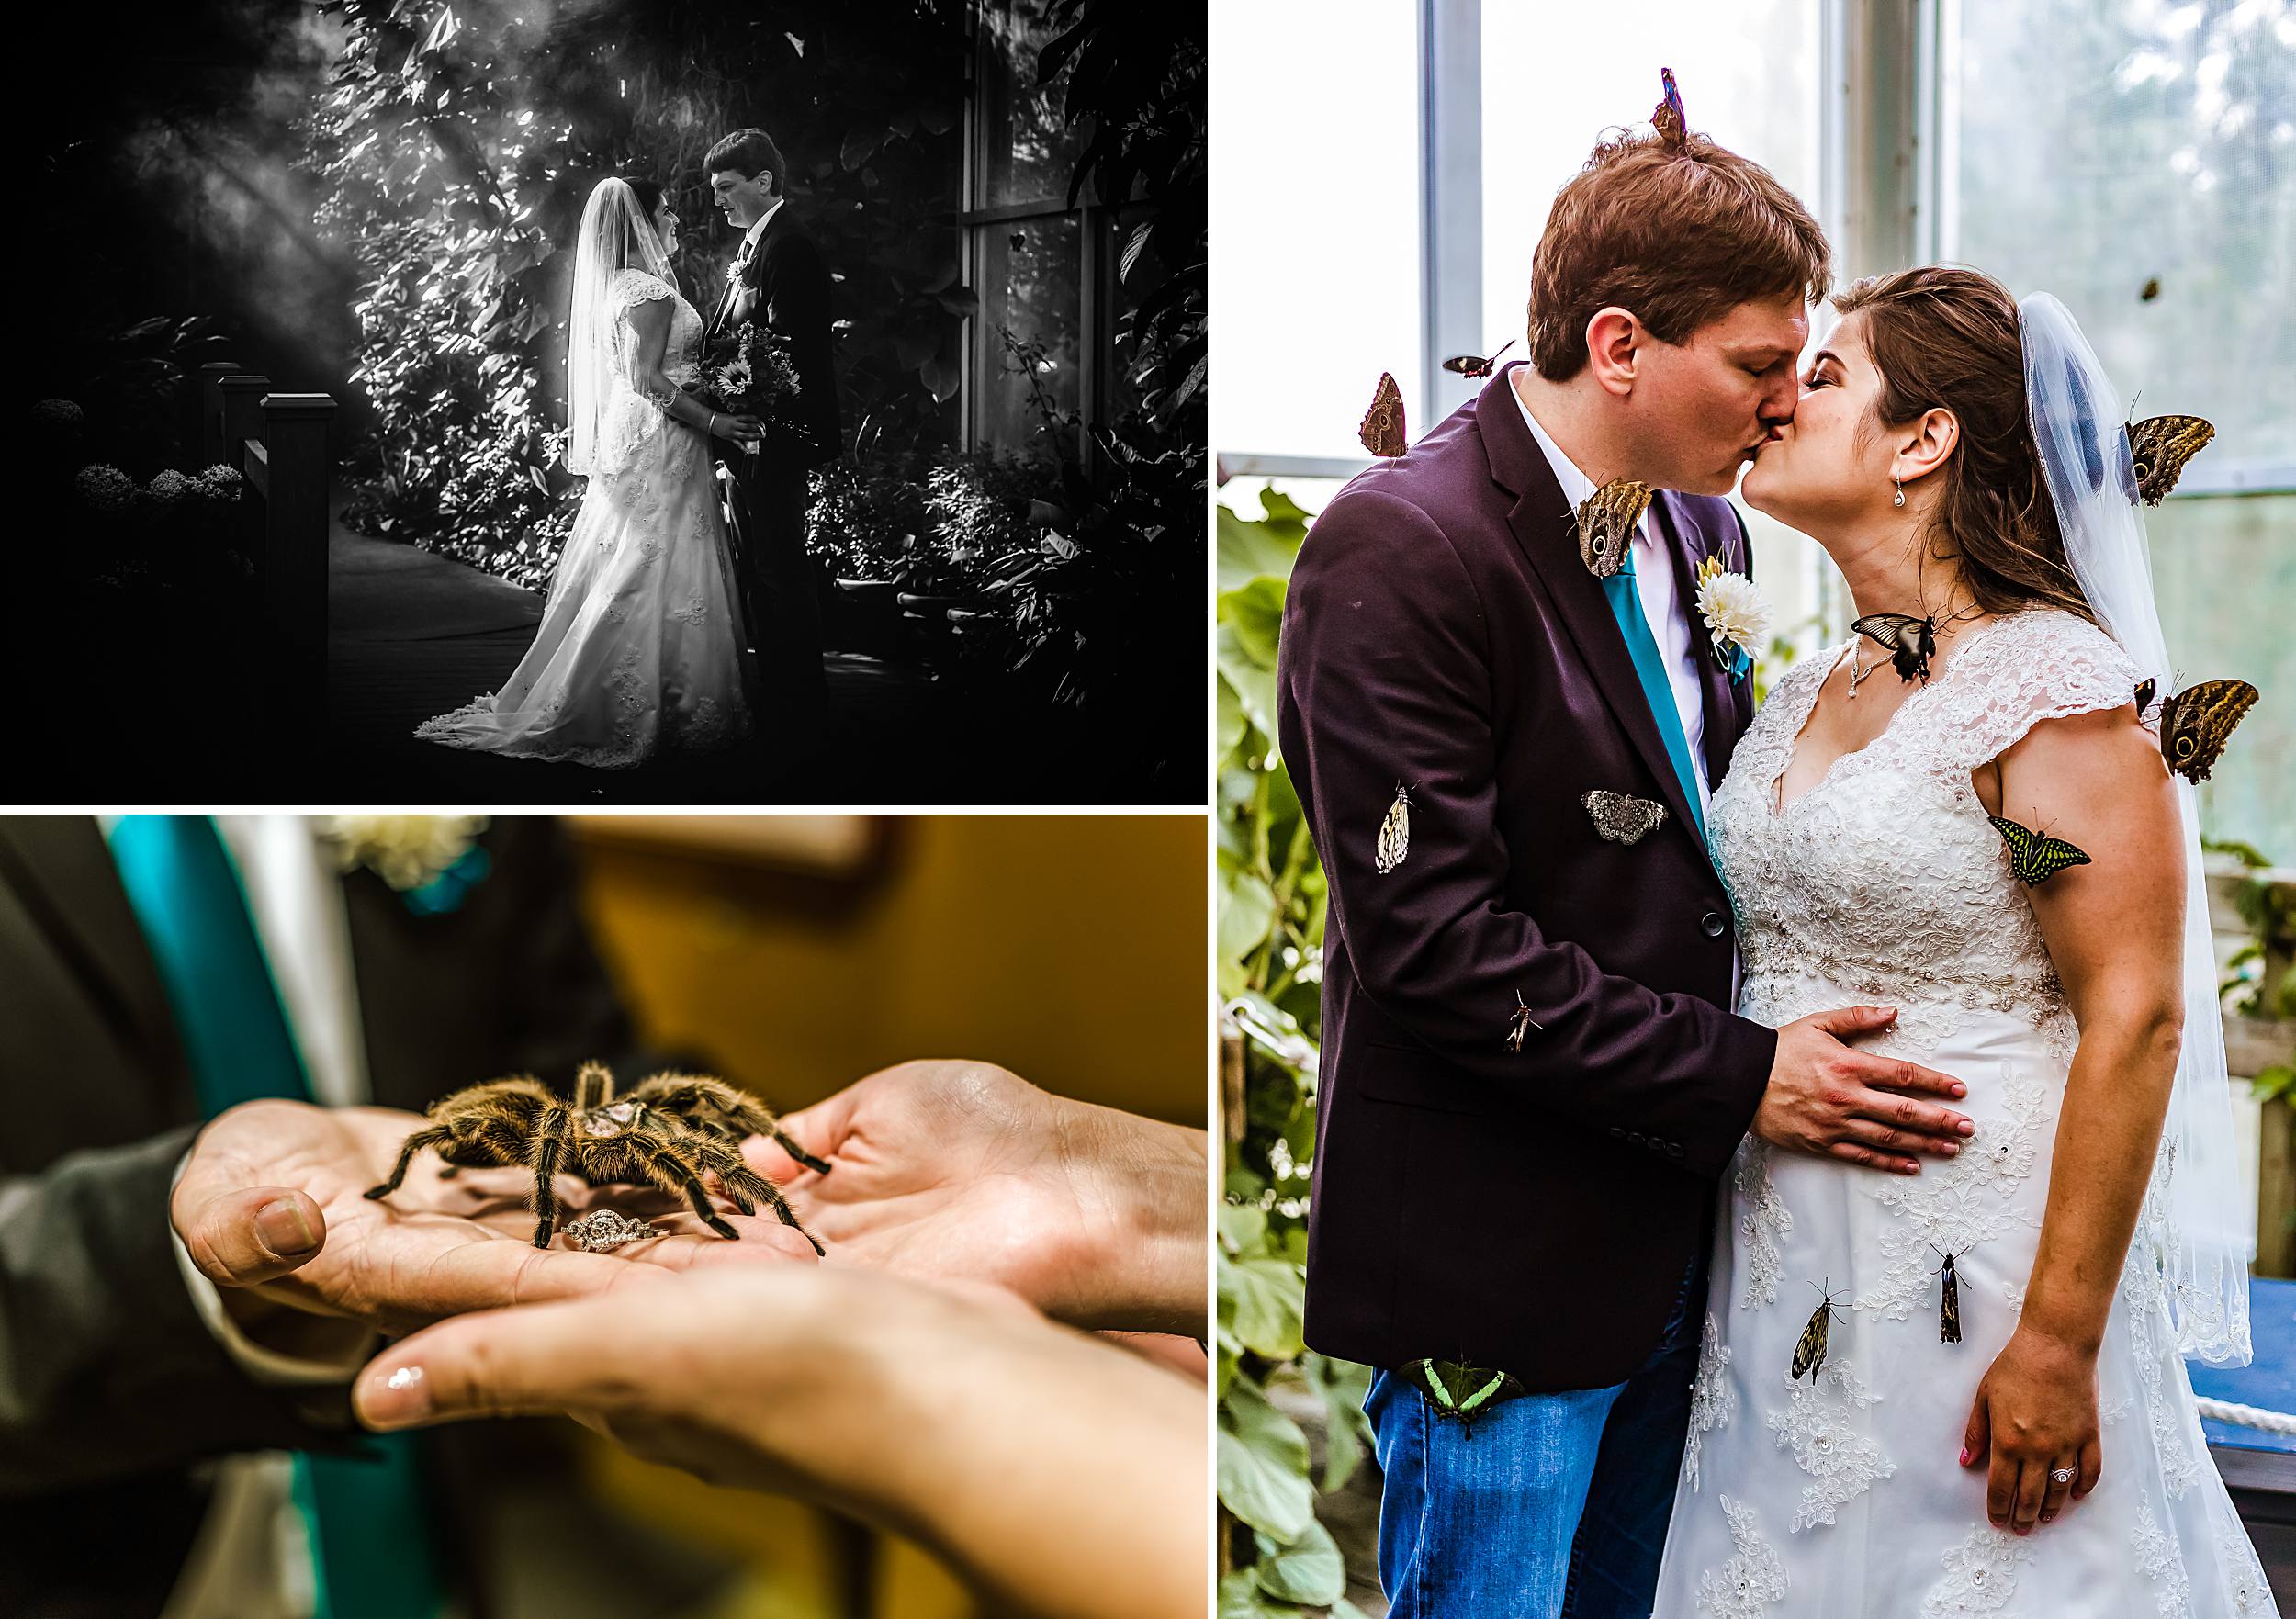 The Butterfly Pavilion in Westminster, CO offers interactive exhibits for your wedding guests.